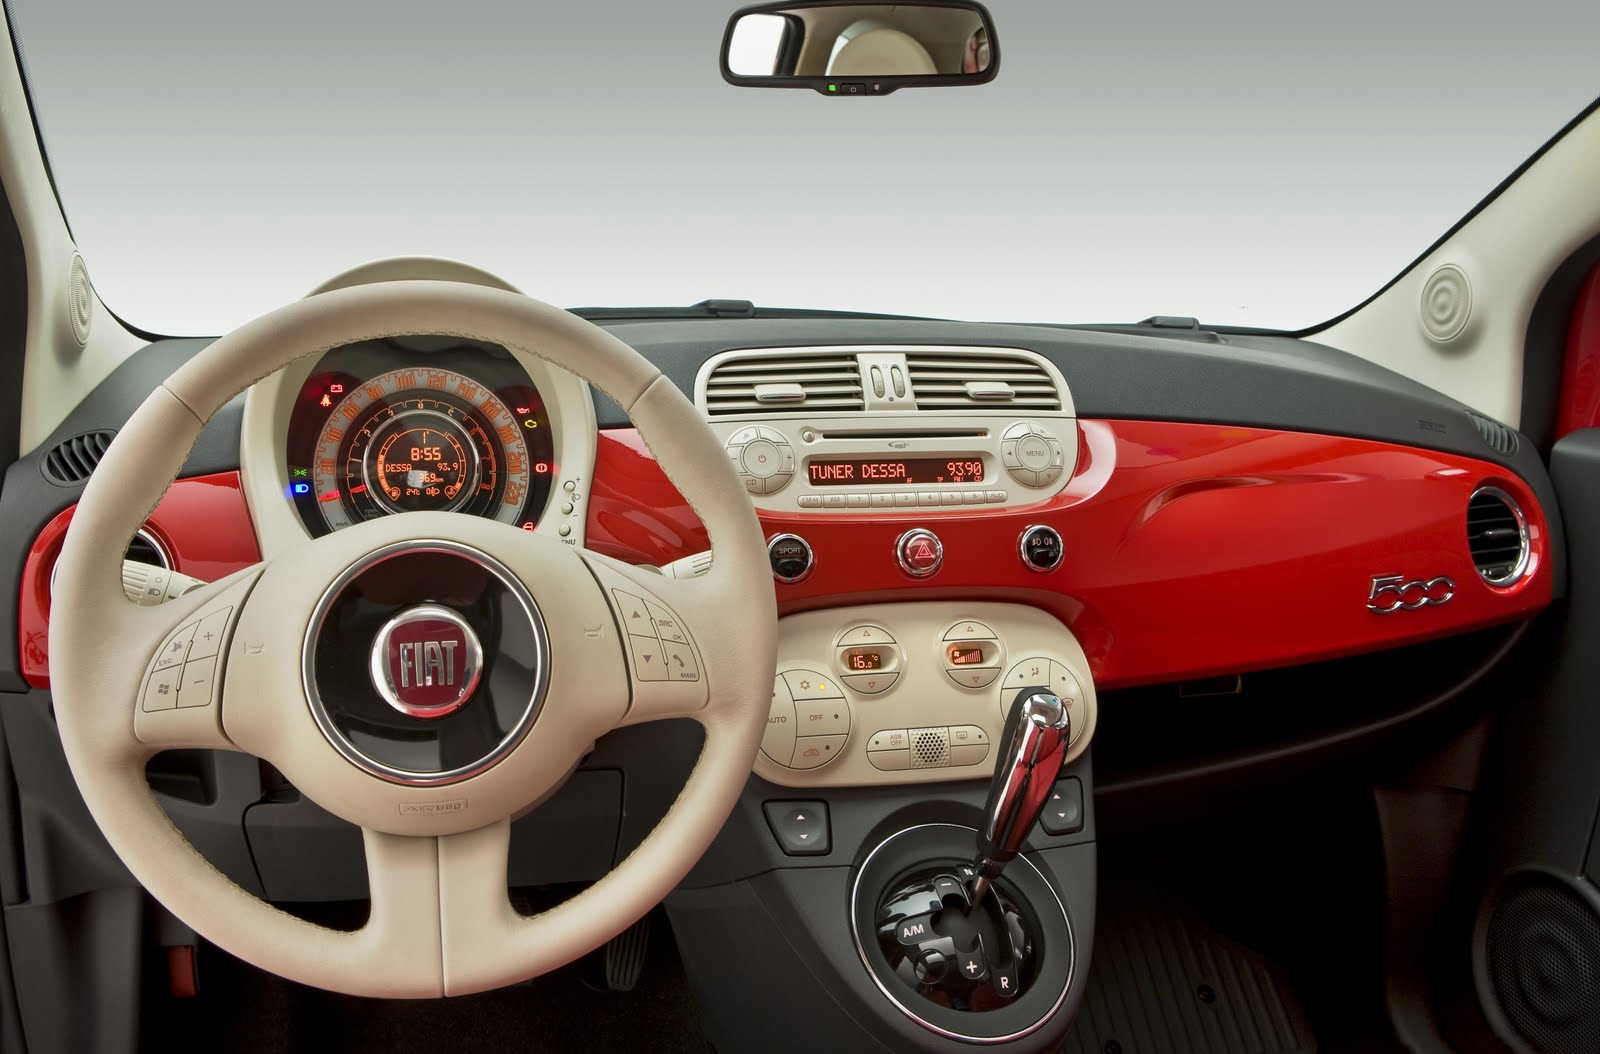 Inside the Fiat 500 Automatic Climate Control Fiat 500 USA